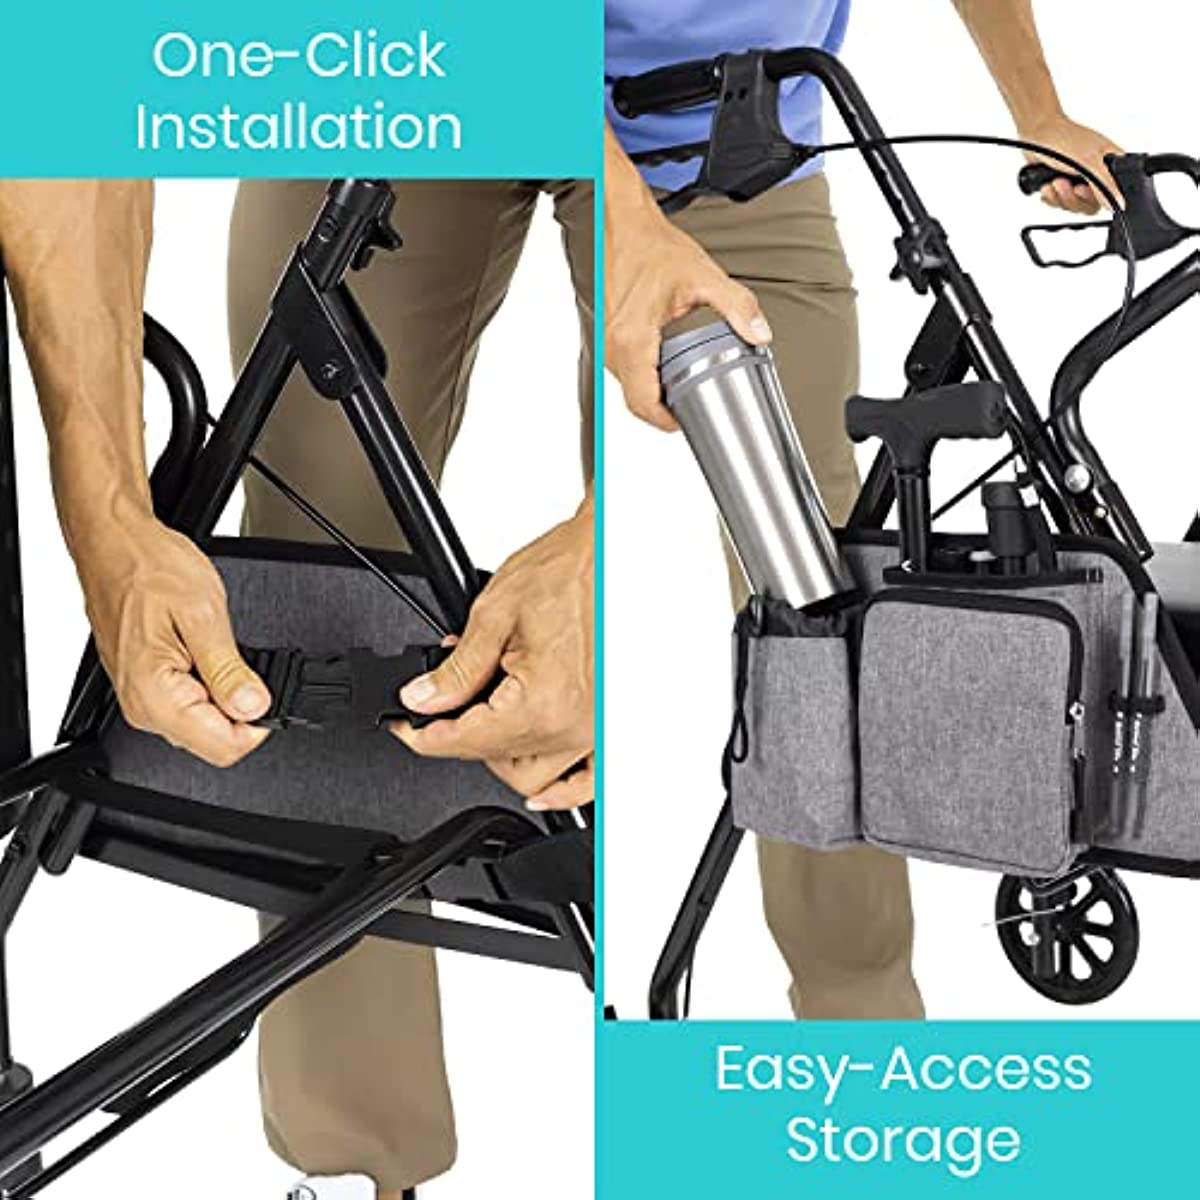 Vive Side Bag for Rollators, Wheelchairs, Walkers - Tote Organizer with Phone Pocket - Storage Travel Pouch - Small Hanging Stroller Accessories for Women, Men, Seniors - Non Slip Cup Holder